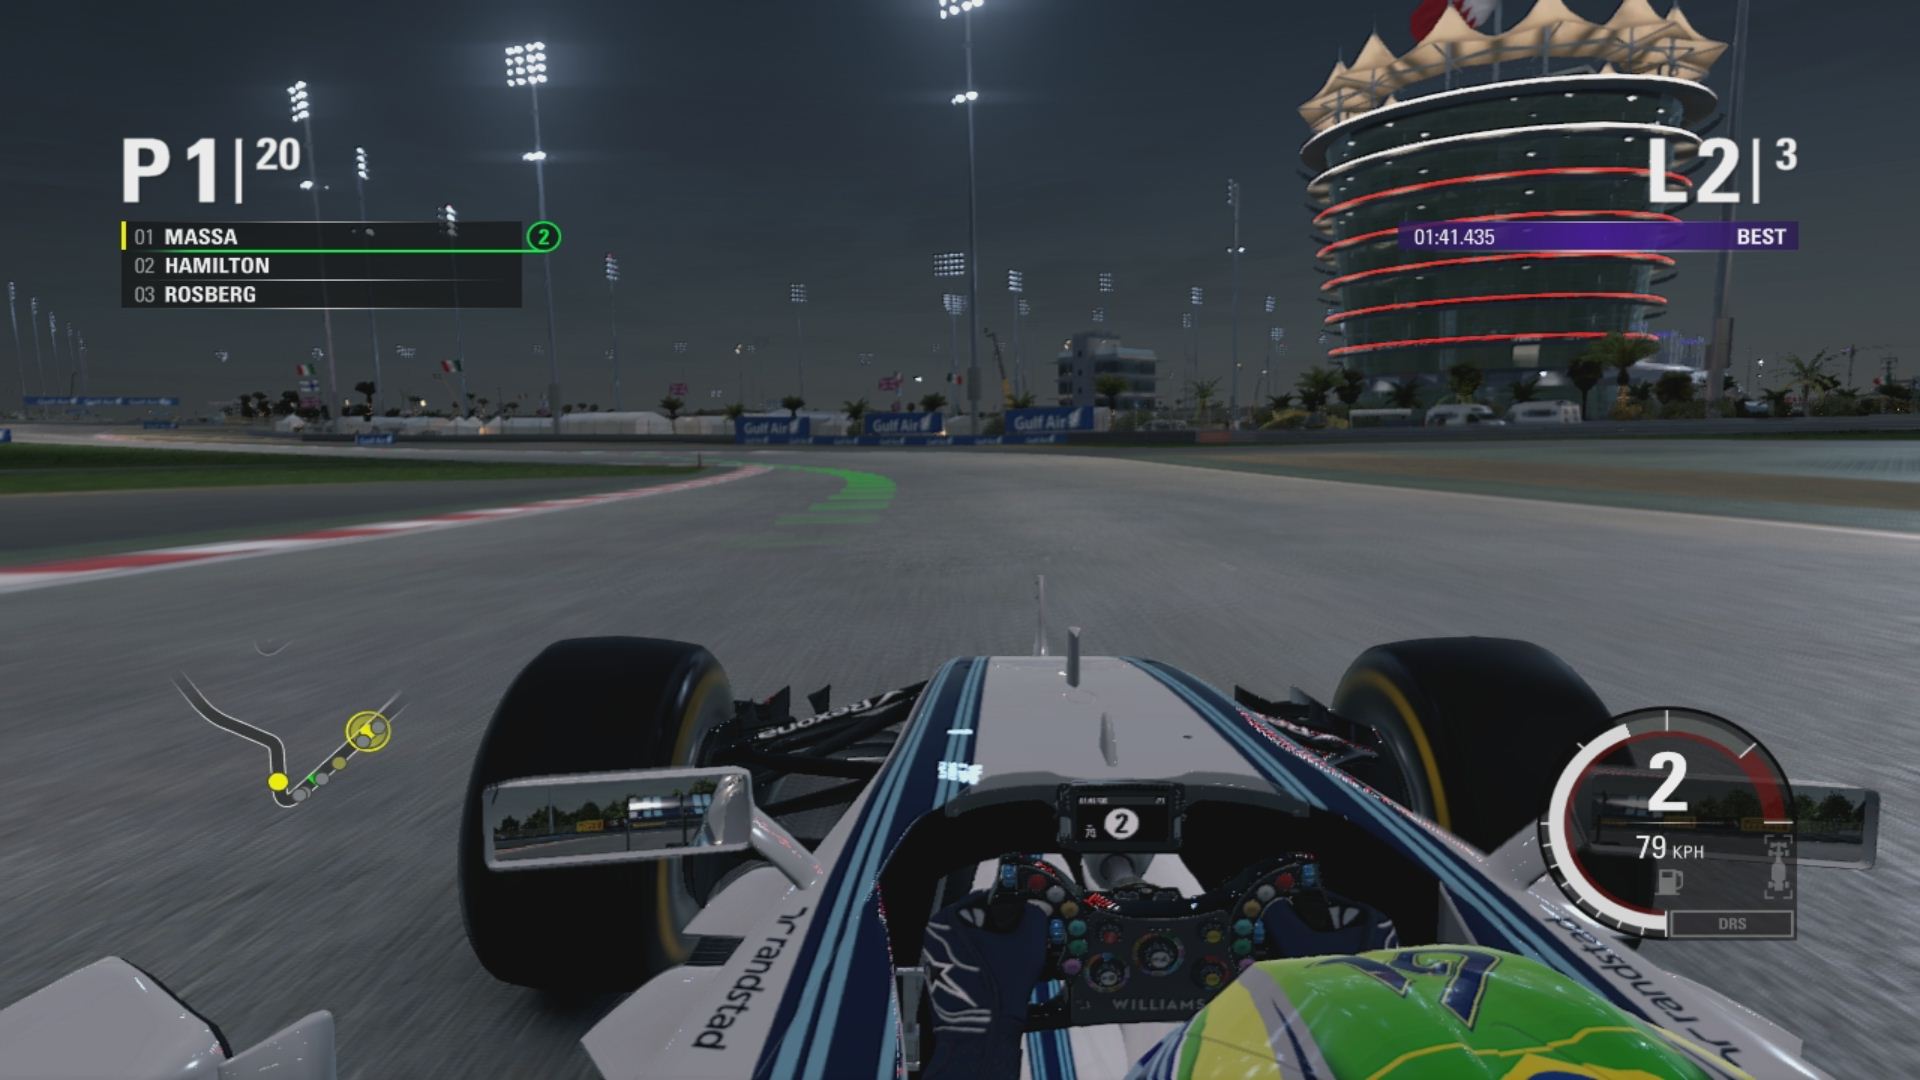 Opa Langwerpig BES F1 2015 Visual Analysis: PS4 vs. Xbox One vs. PC